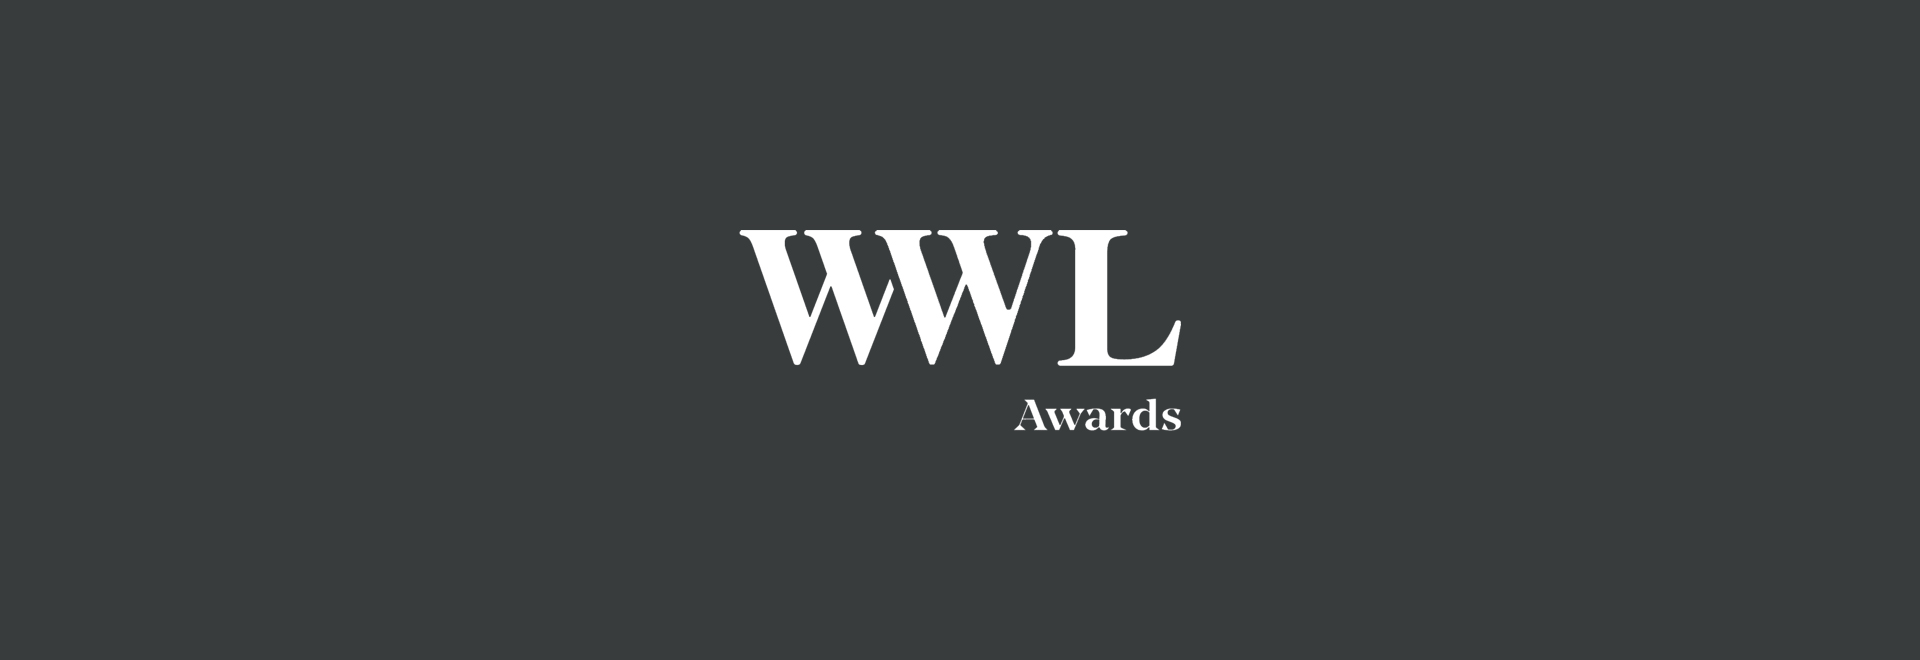 Accuro Winner of the Who’s Who Legal Switzerland Awards in the “Private Client Trust & Advisory Services Firm of the Year” category